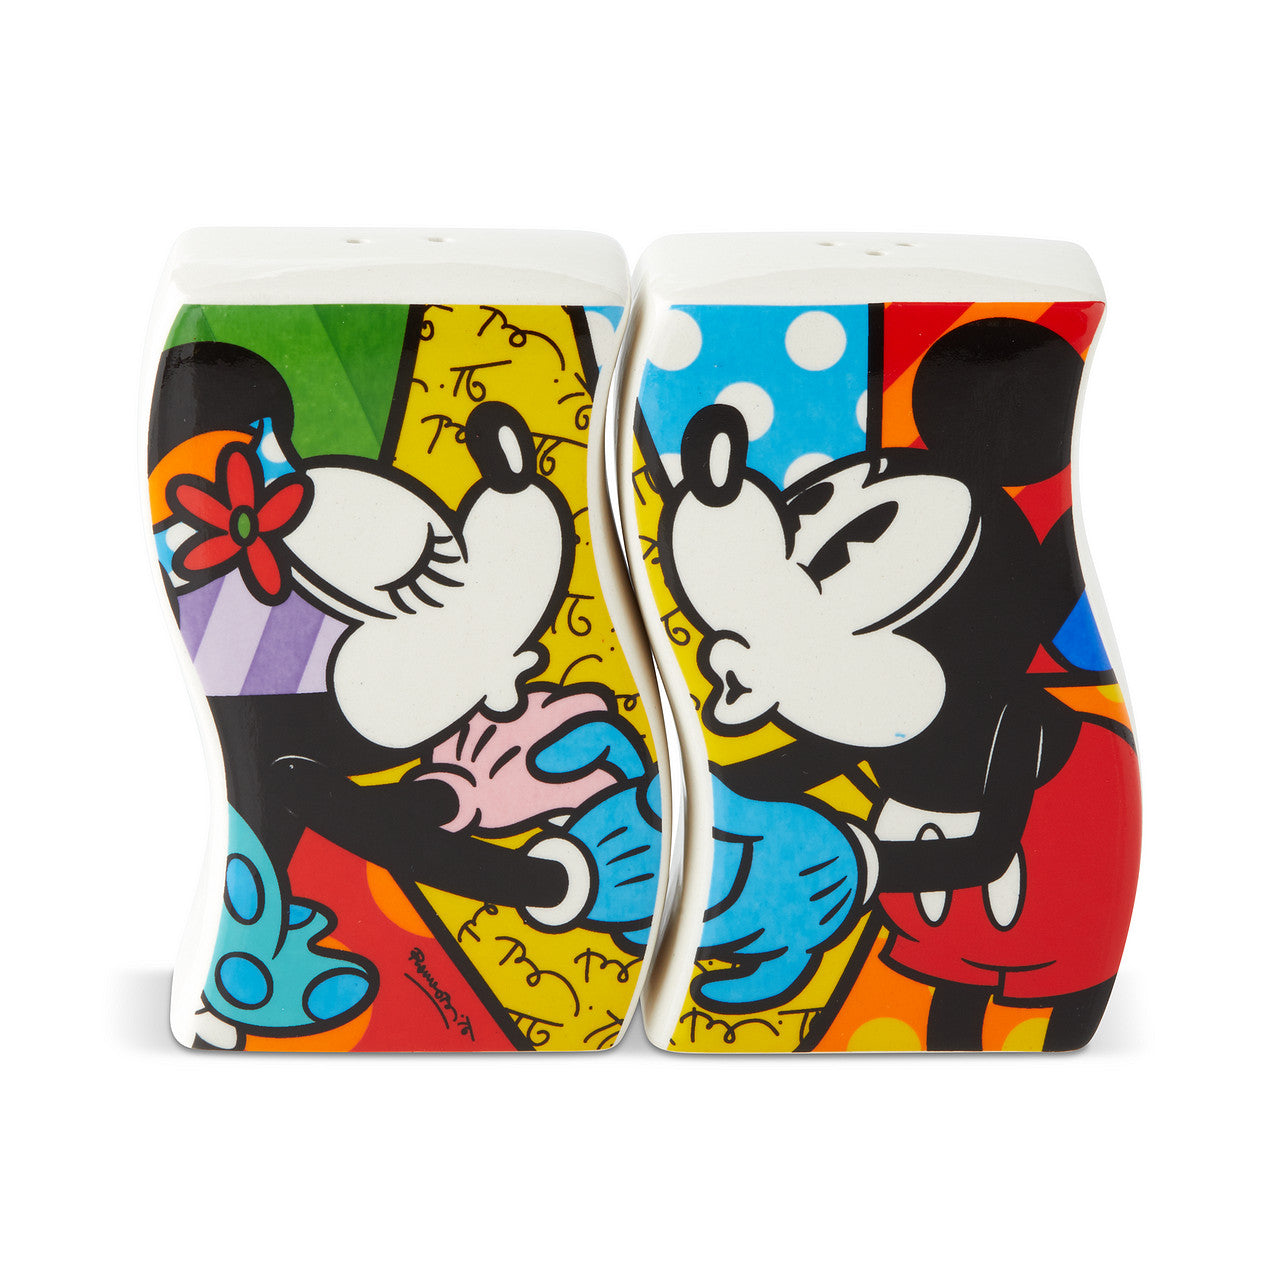 Mickey and Minne Mouse Salt & Pepper Shaker